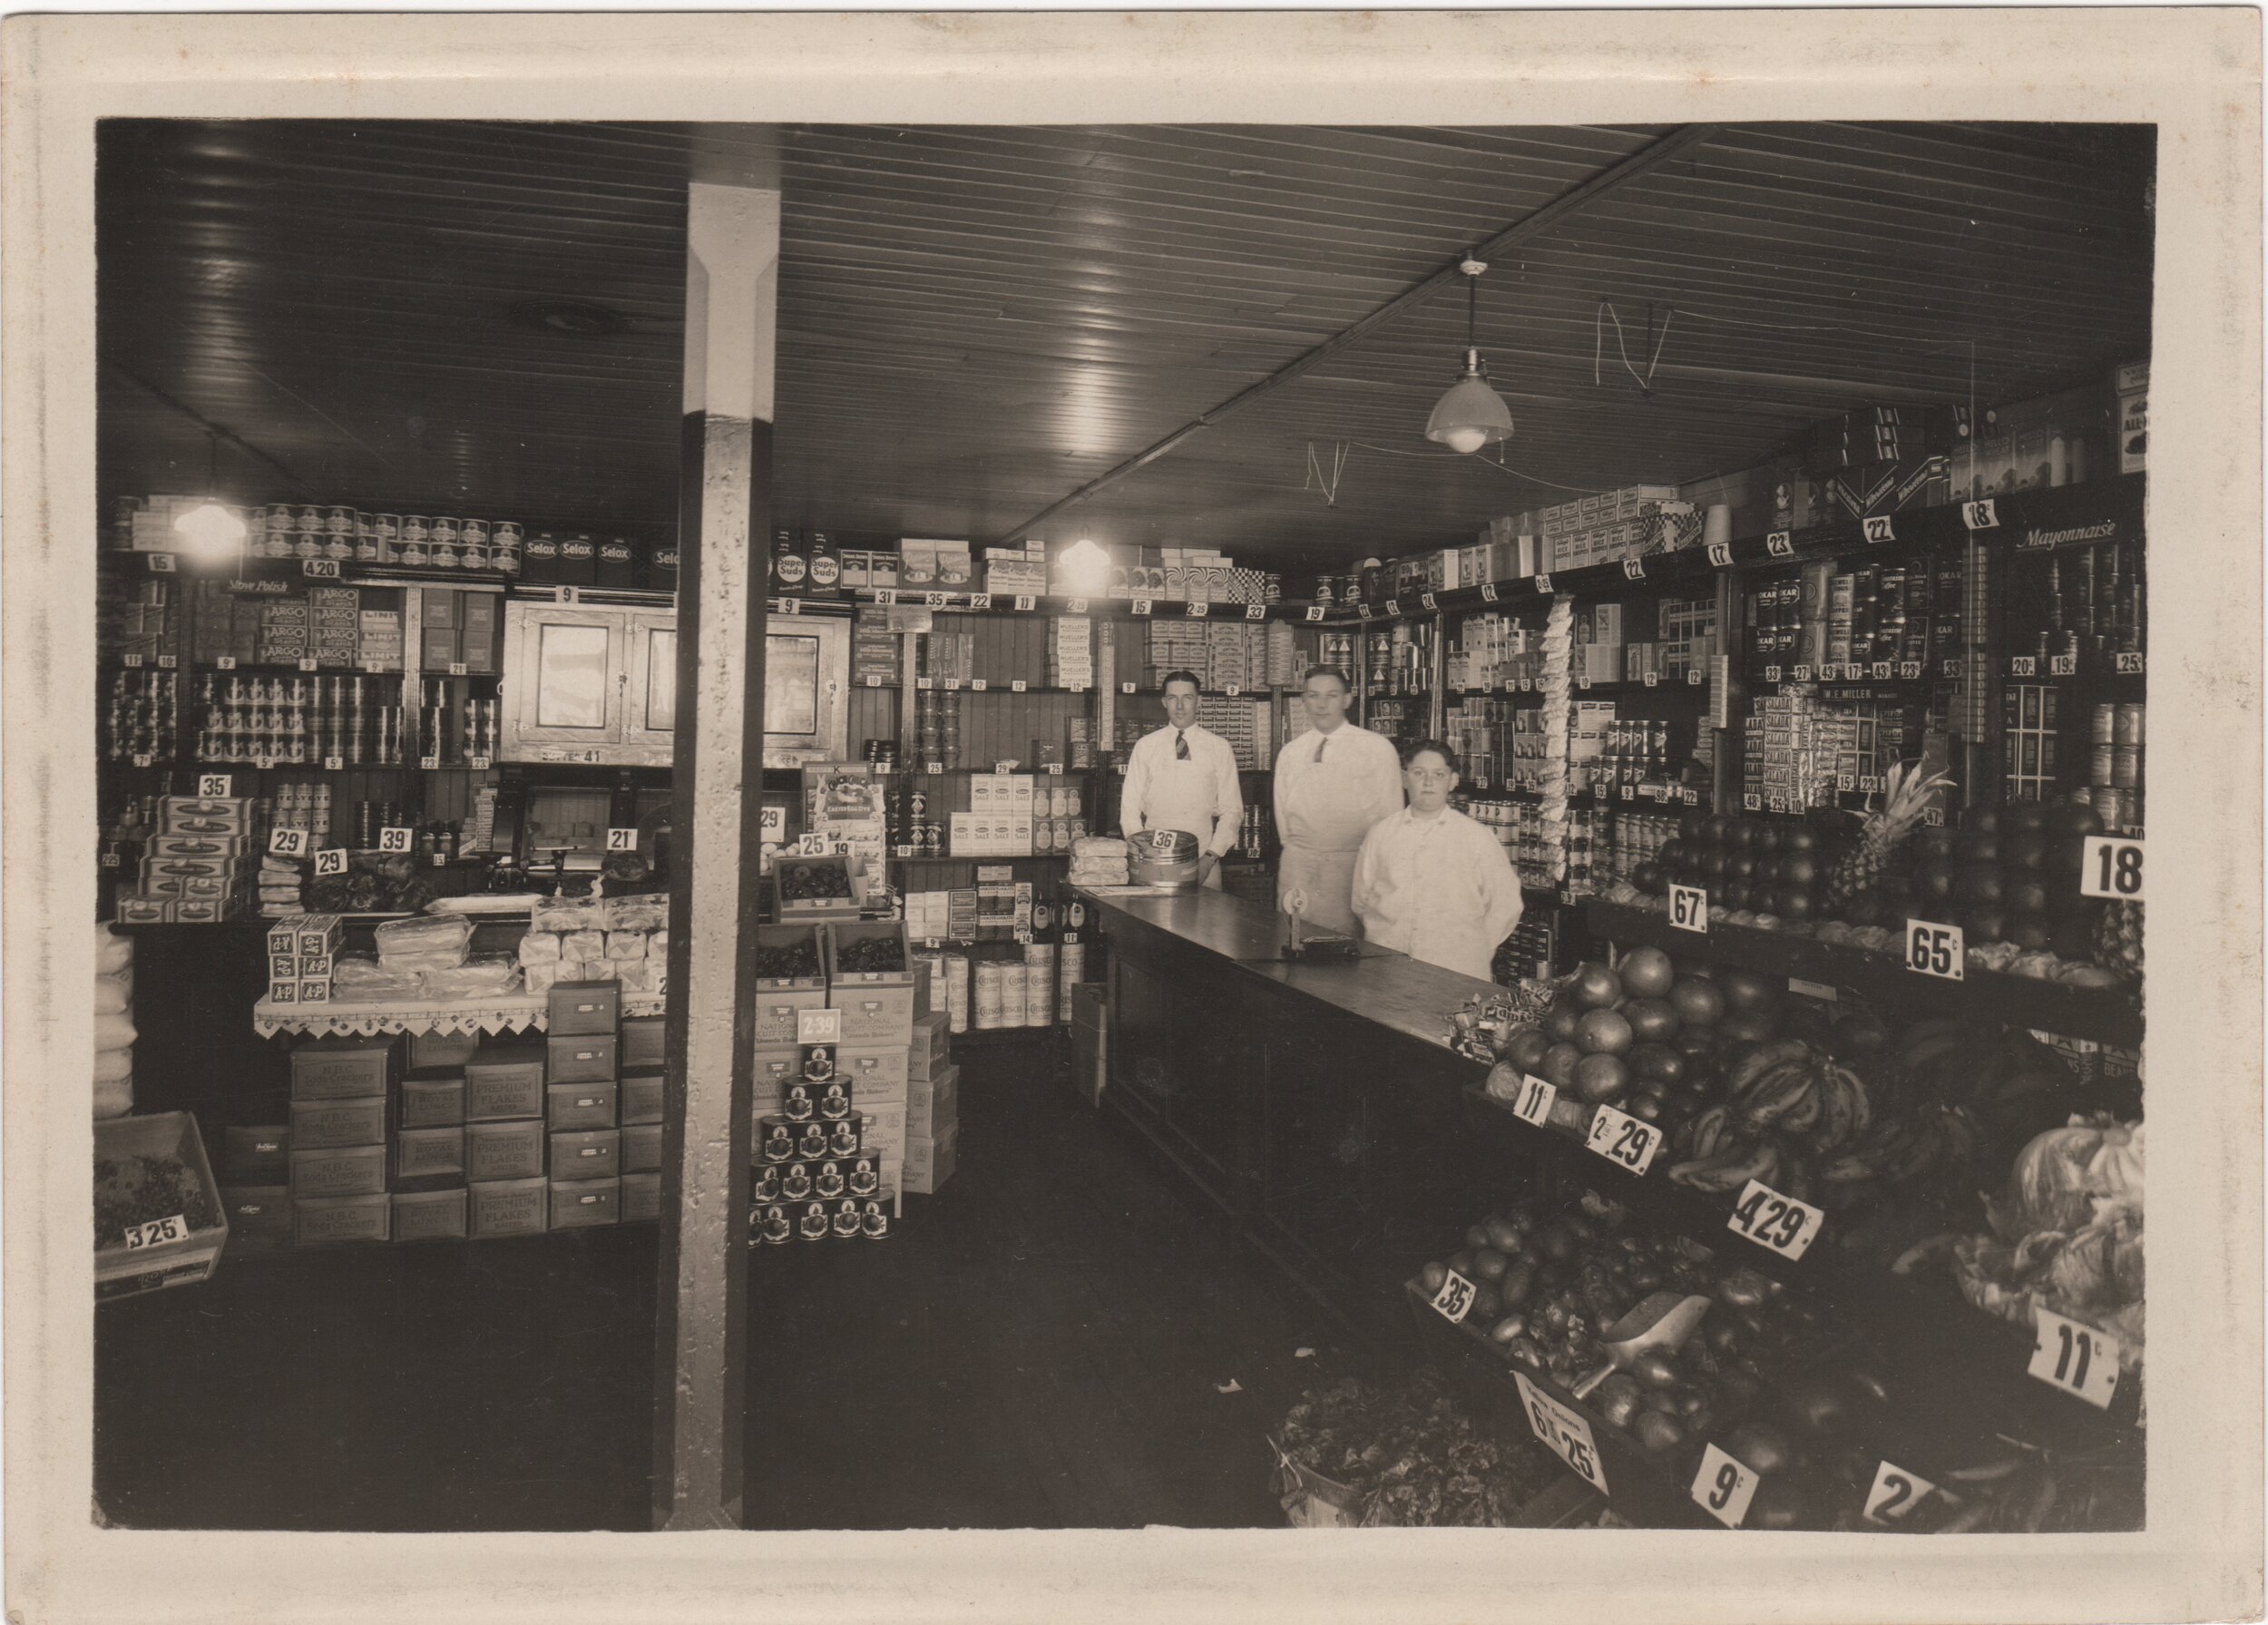 "Where Economy Rules": Vintage 1930s A&P Grocery Store